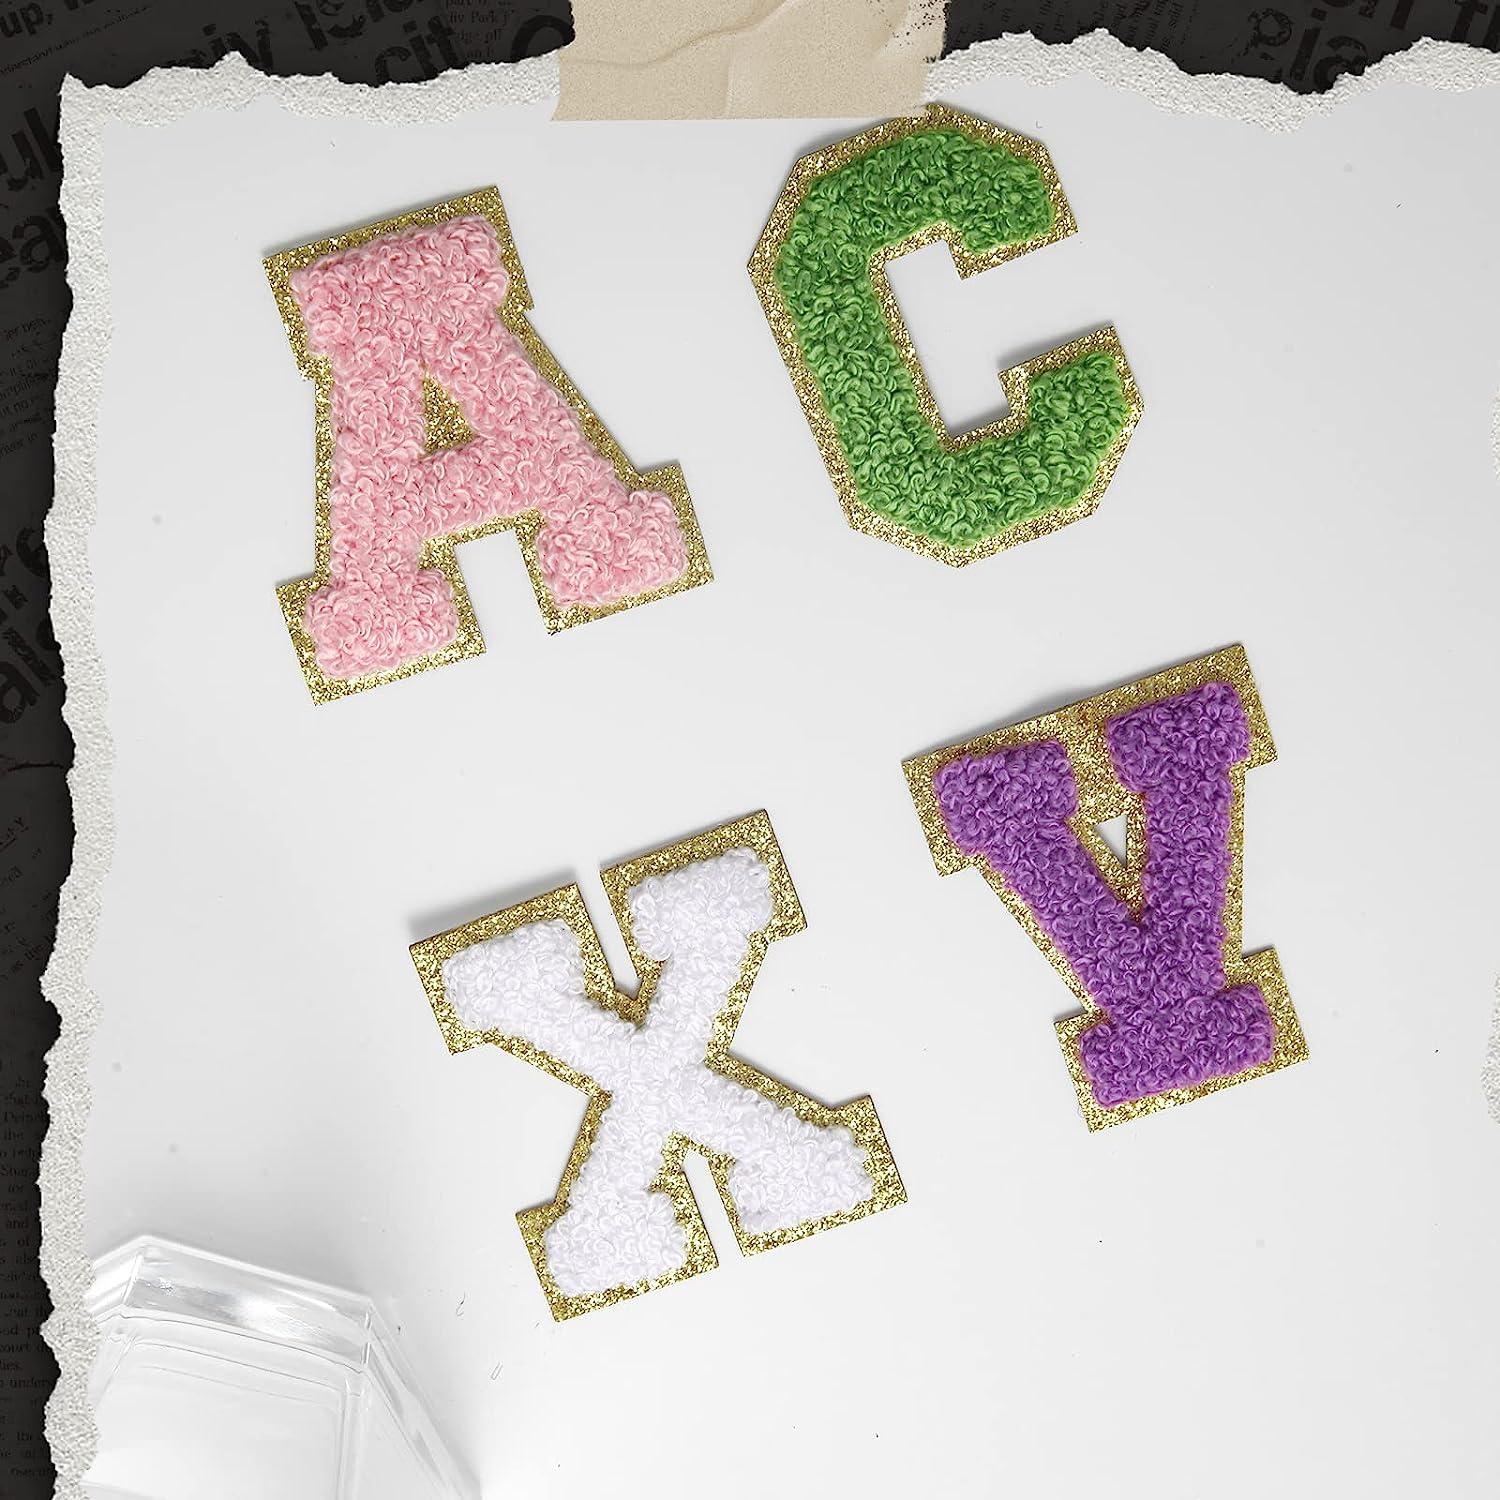  156 Pcs Chenille Letter Patches Iron on Glitter Self